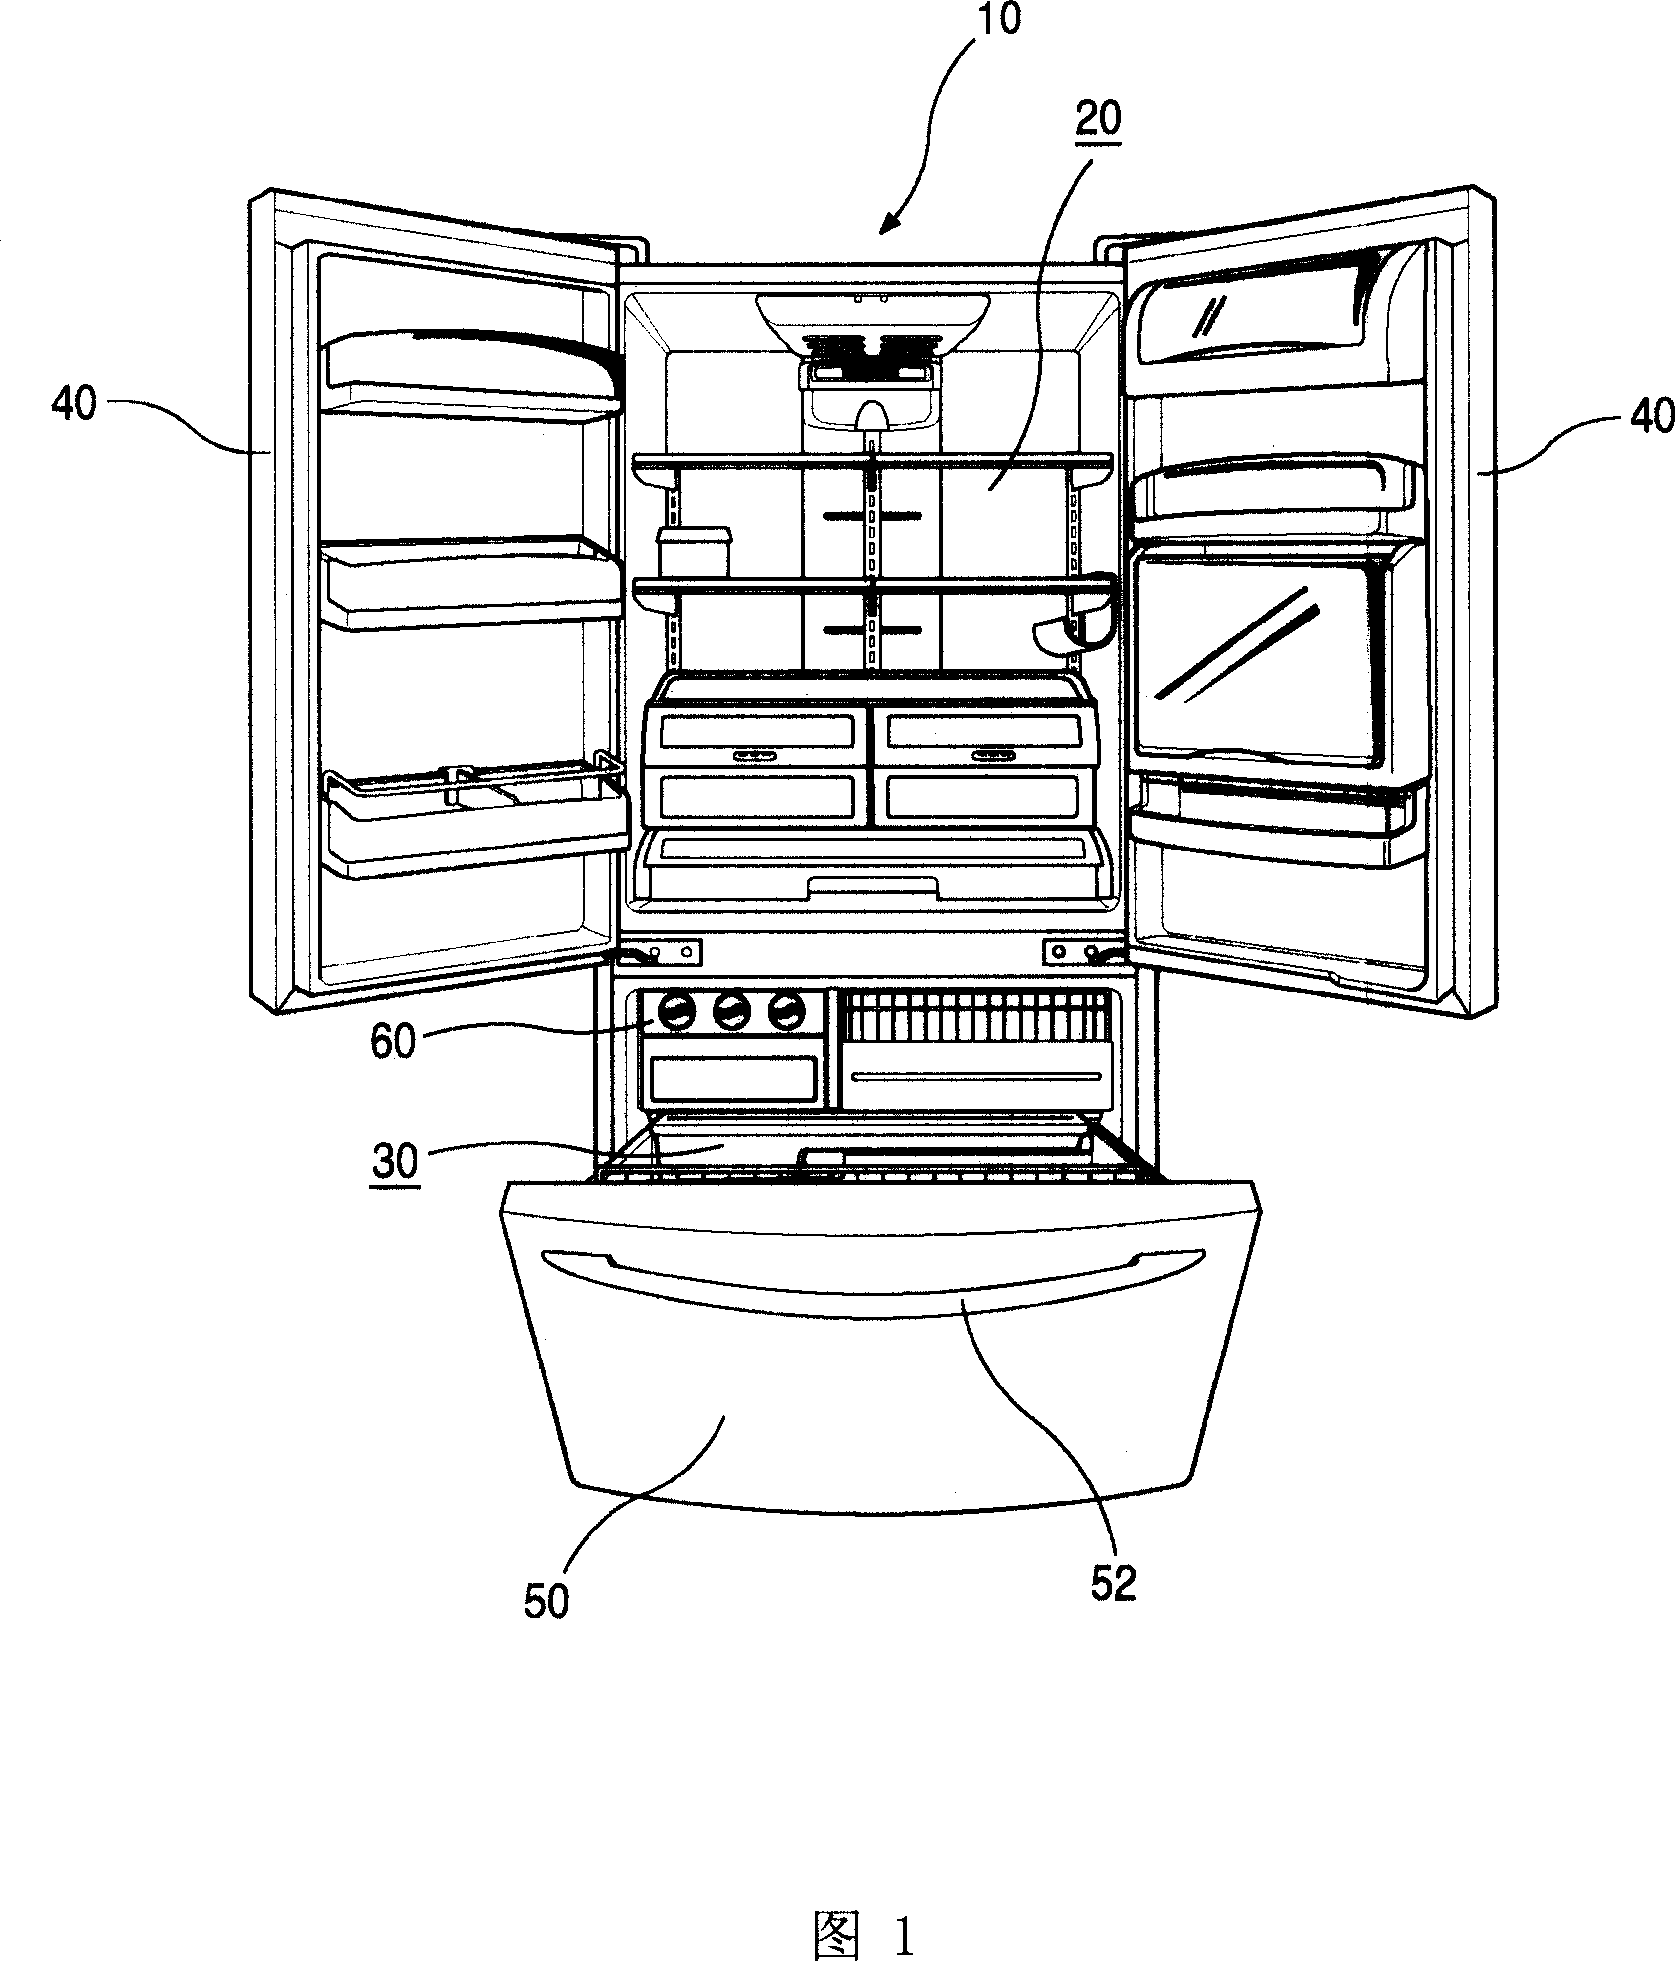 Structure for setting ice-maker connector of refrigerator